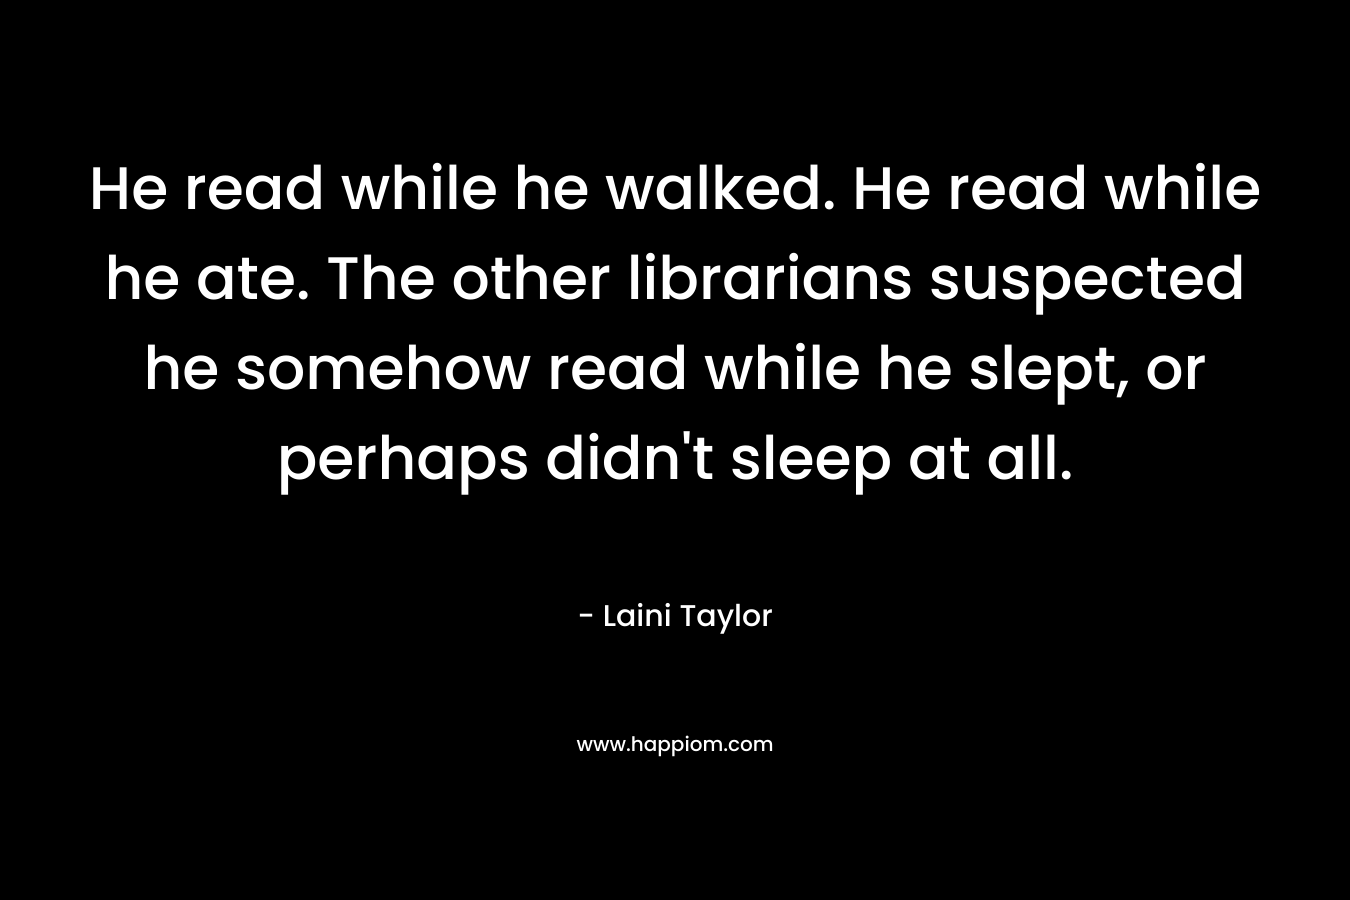 He read while he walked. He read while he ate. The other librarians suspected he somehow read while he slept, or perhaps didn’t sleep at all. – Laini Taylor